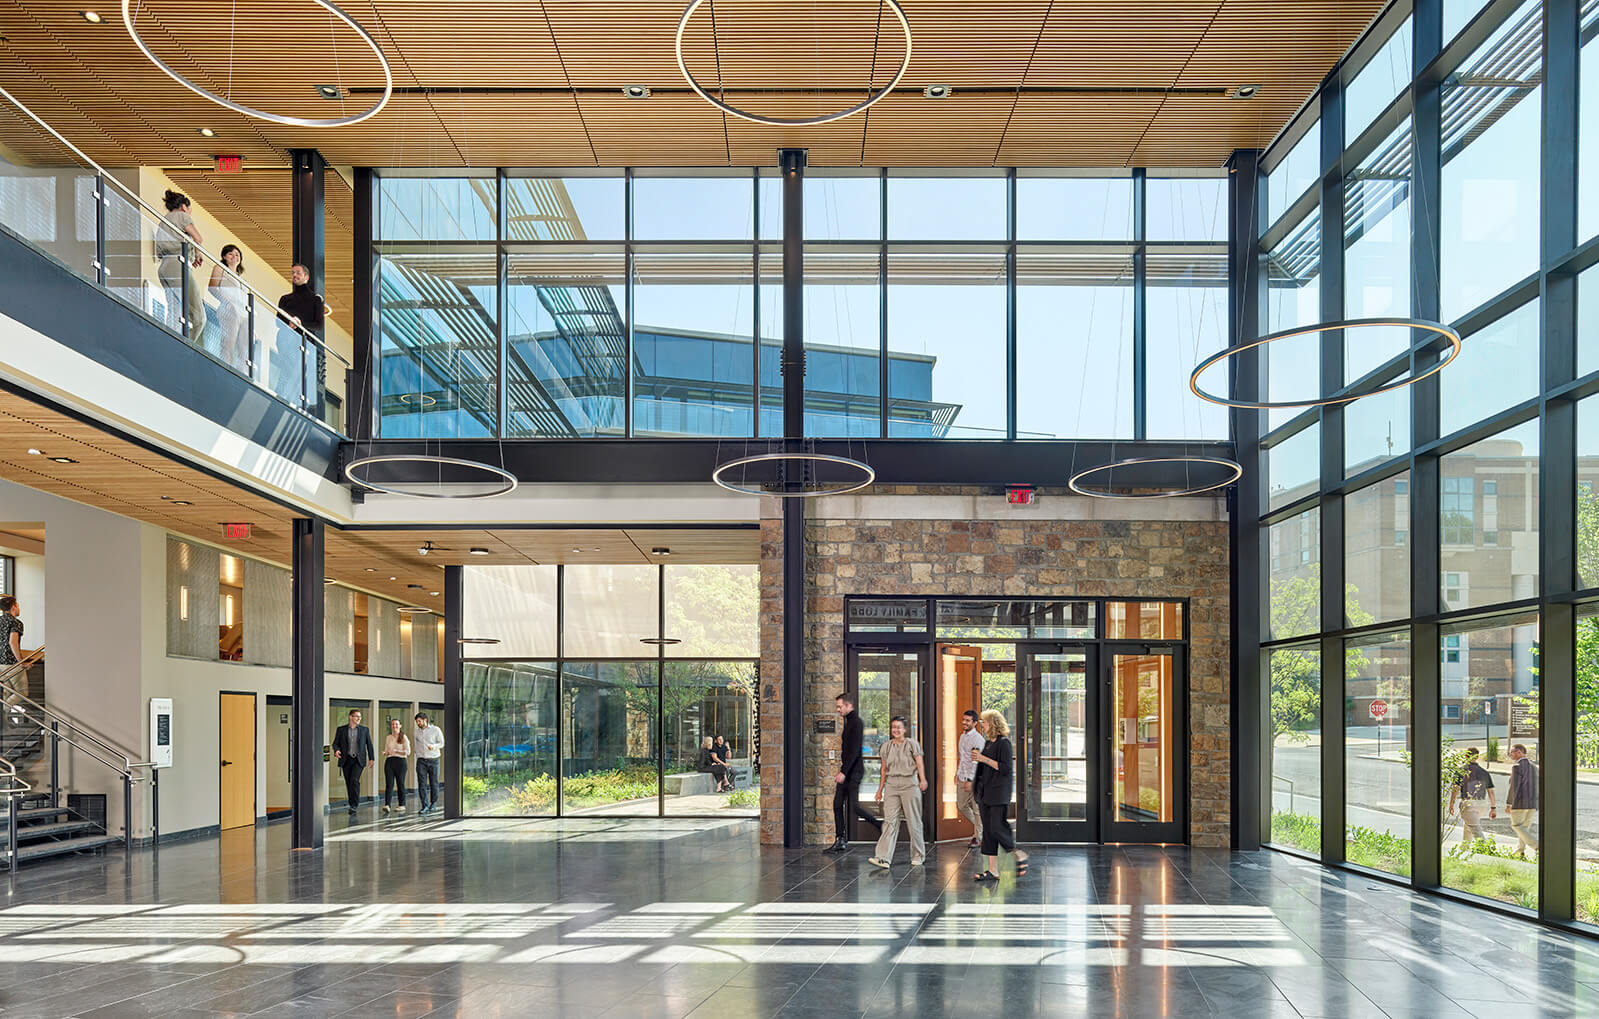 A view of the interior of the Business Innovation Building shows people entering lobby adorned with high ceilings and floor-to-ceiling windows.